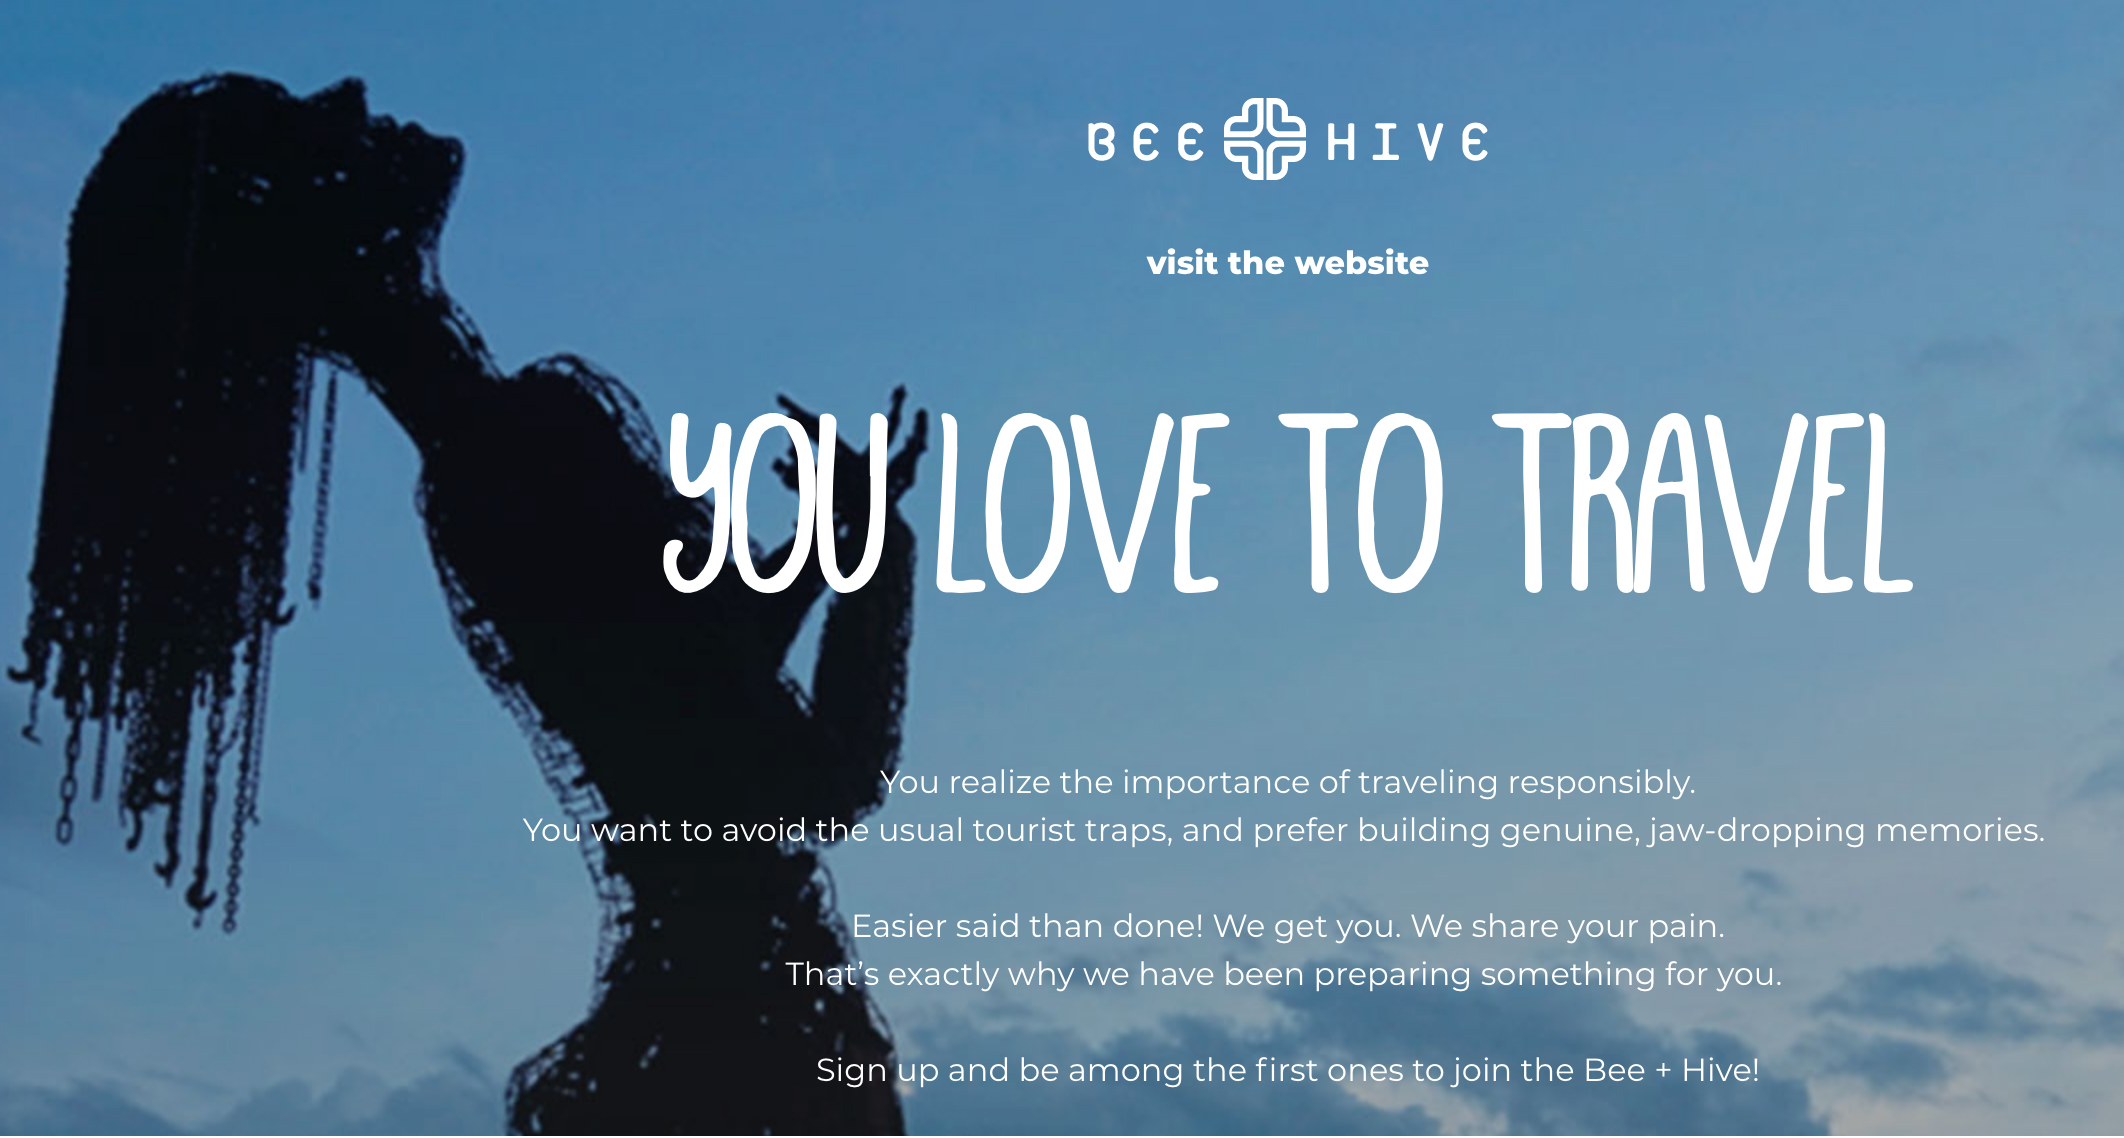 Bee  Hive launches a booking platform